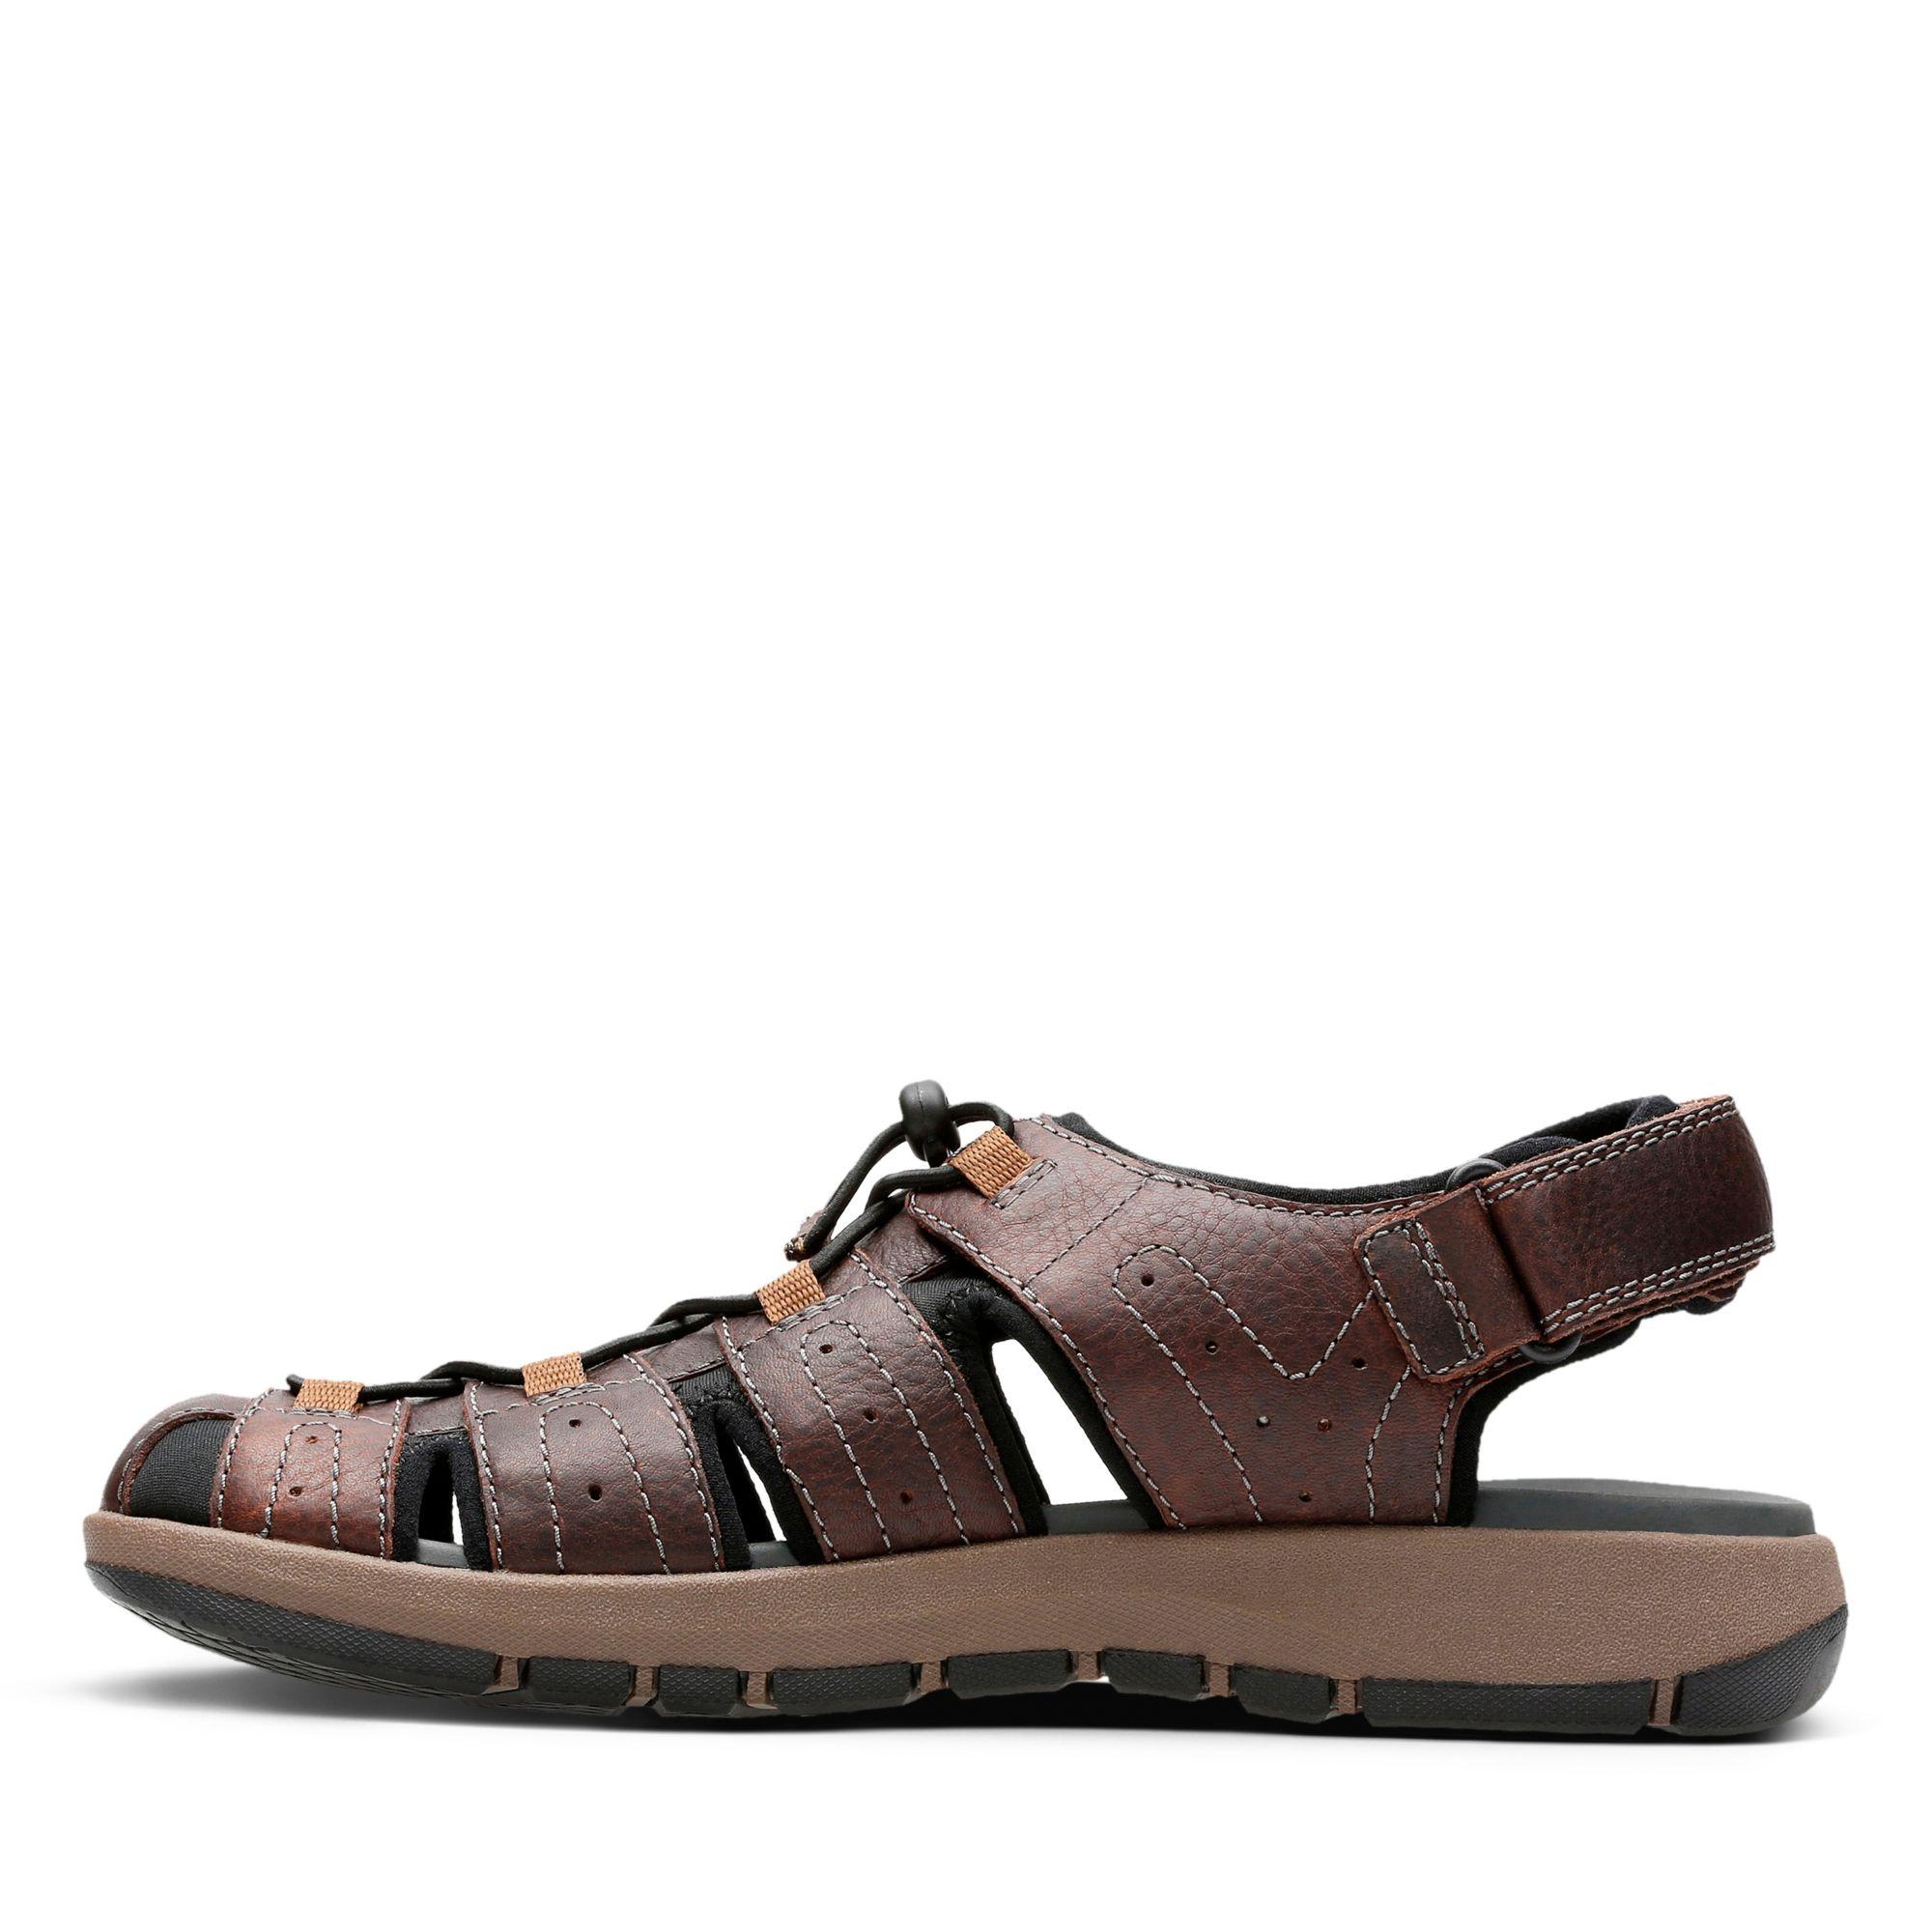 BRIXBY COVE MENS CLARKS CLOSED TOE LEATHER SLINGBACK FISHERMAN SUMMER SANDALS 